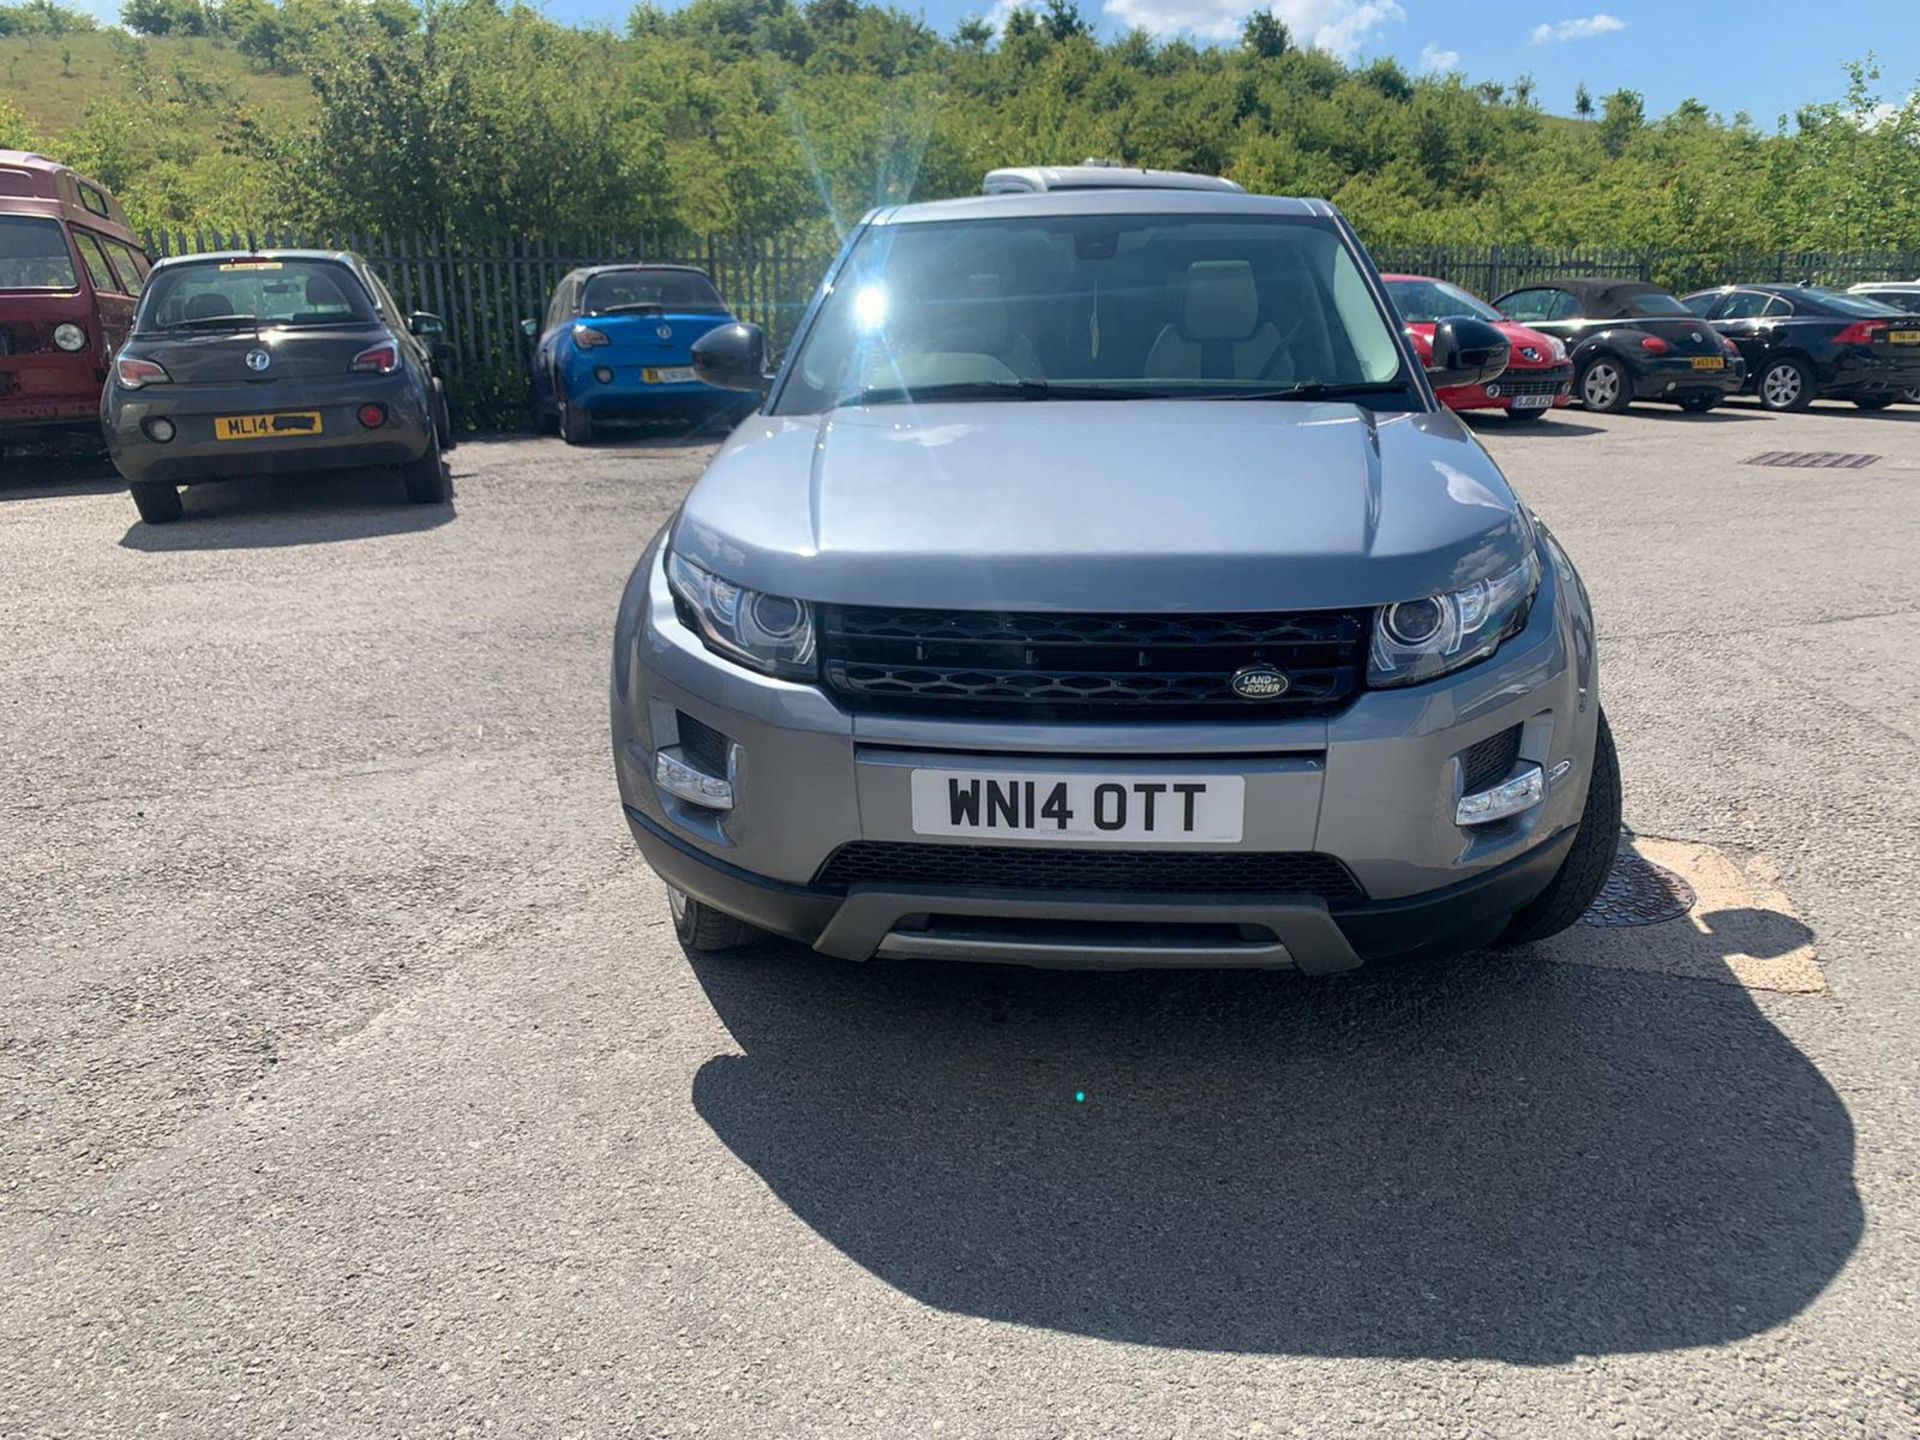 2014/14 REG LAND ROVER RANGE ROVER EVOQUE DYNAMIC S 2.2 DIESEL GREY, SHOWING 2 FORMER KEEPERS